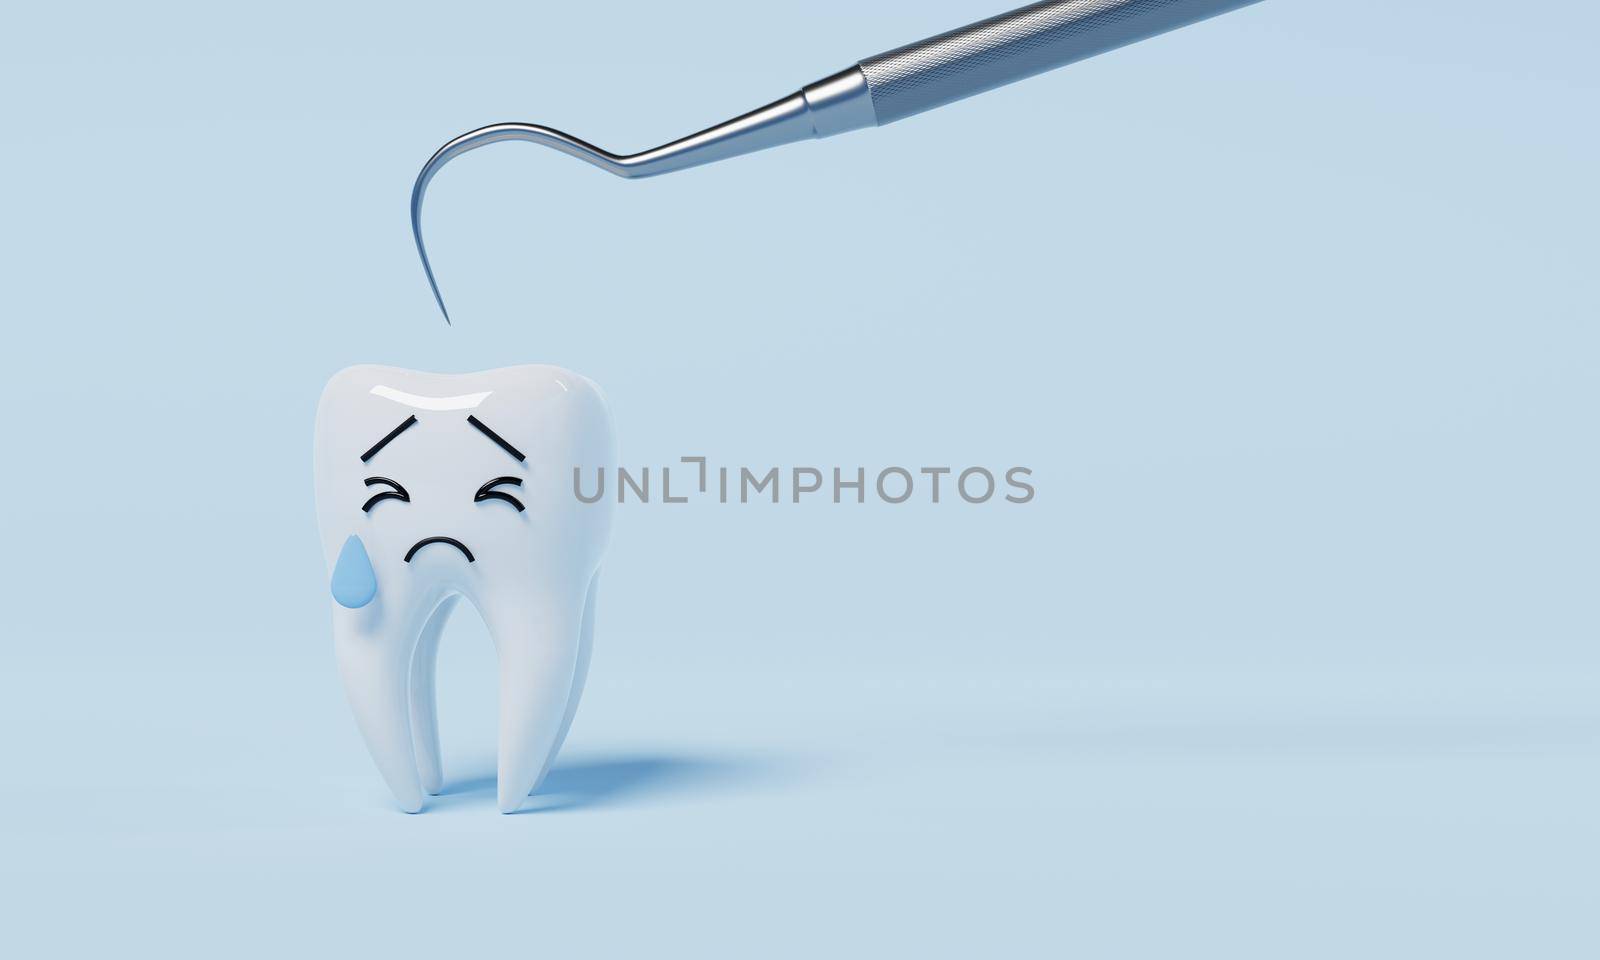 Tooth afraid of dental inspection hooks for yearly oral health check cause of tooth decay on blue background. Health care and medical concept. 3D illustration rendering by MiniStocker